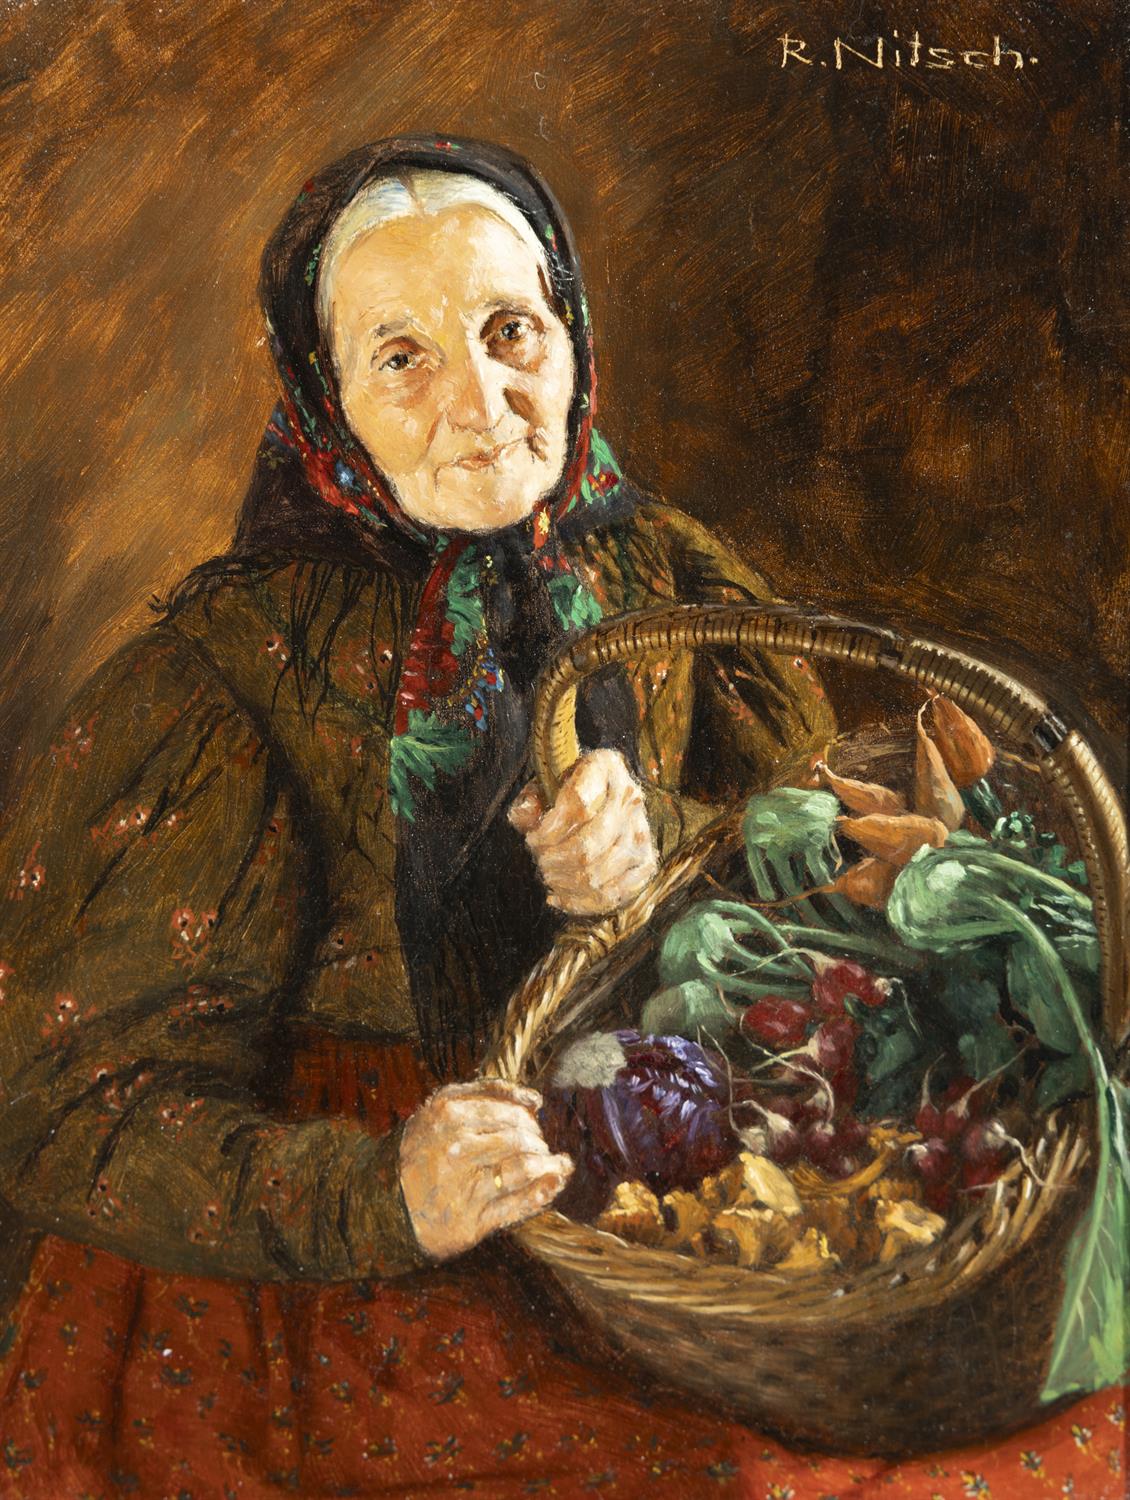 RICHARD NITSCH (GERMAN) (1866-1945) An Elderly Woman with a Basket of Vegetables Oil on panel 18x - Image 2 of 5